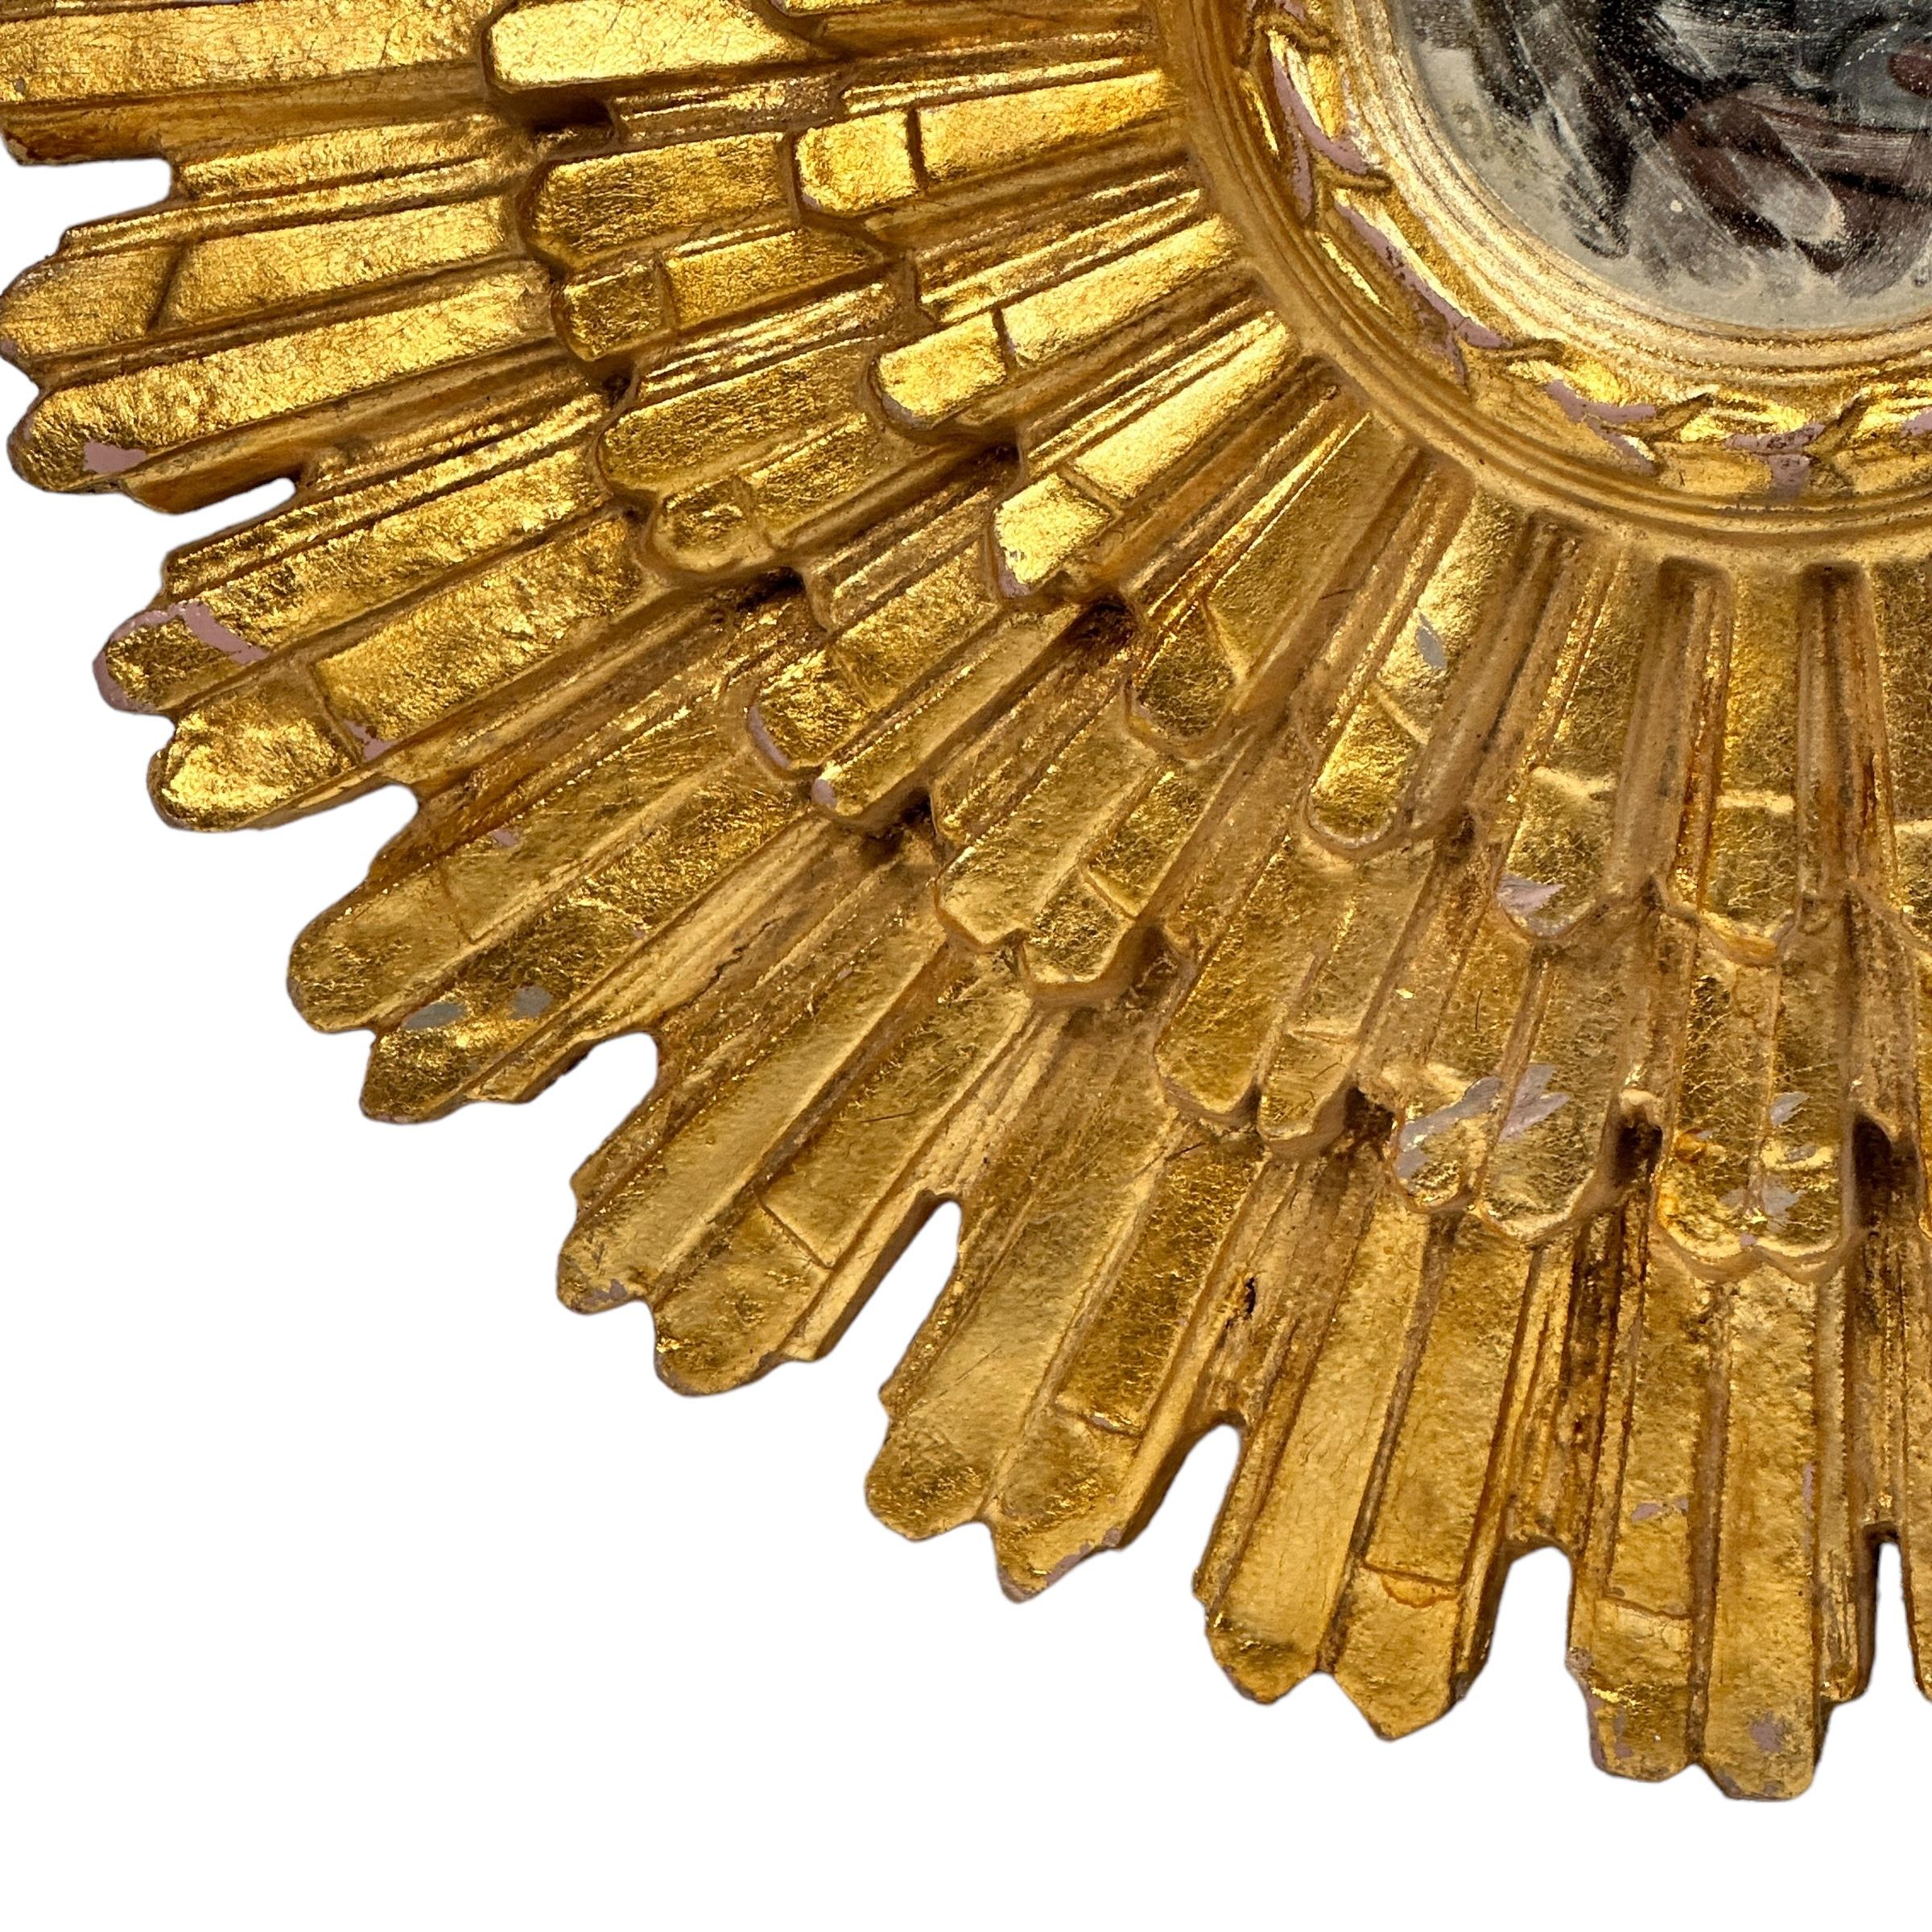 A gorgeous sunburst or starburst mirror. Made of gilded wood. It measures approximate: 25.75